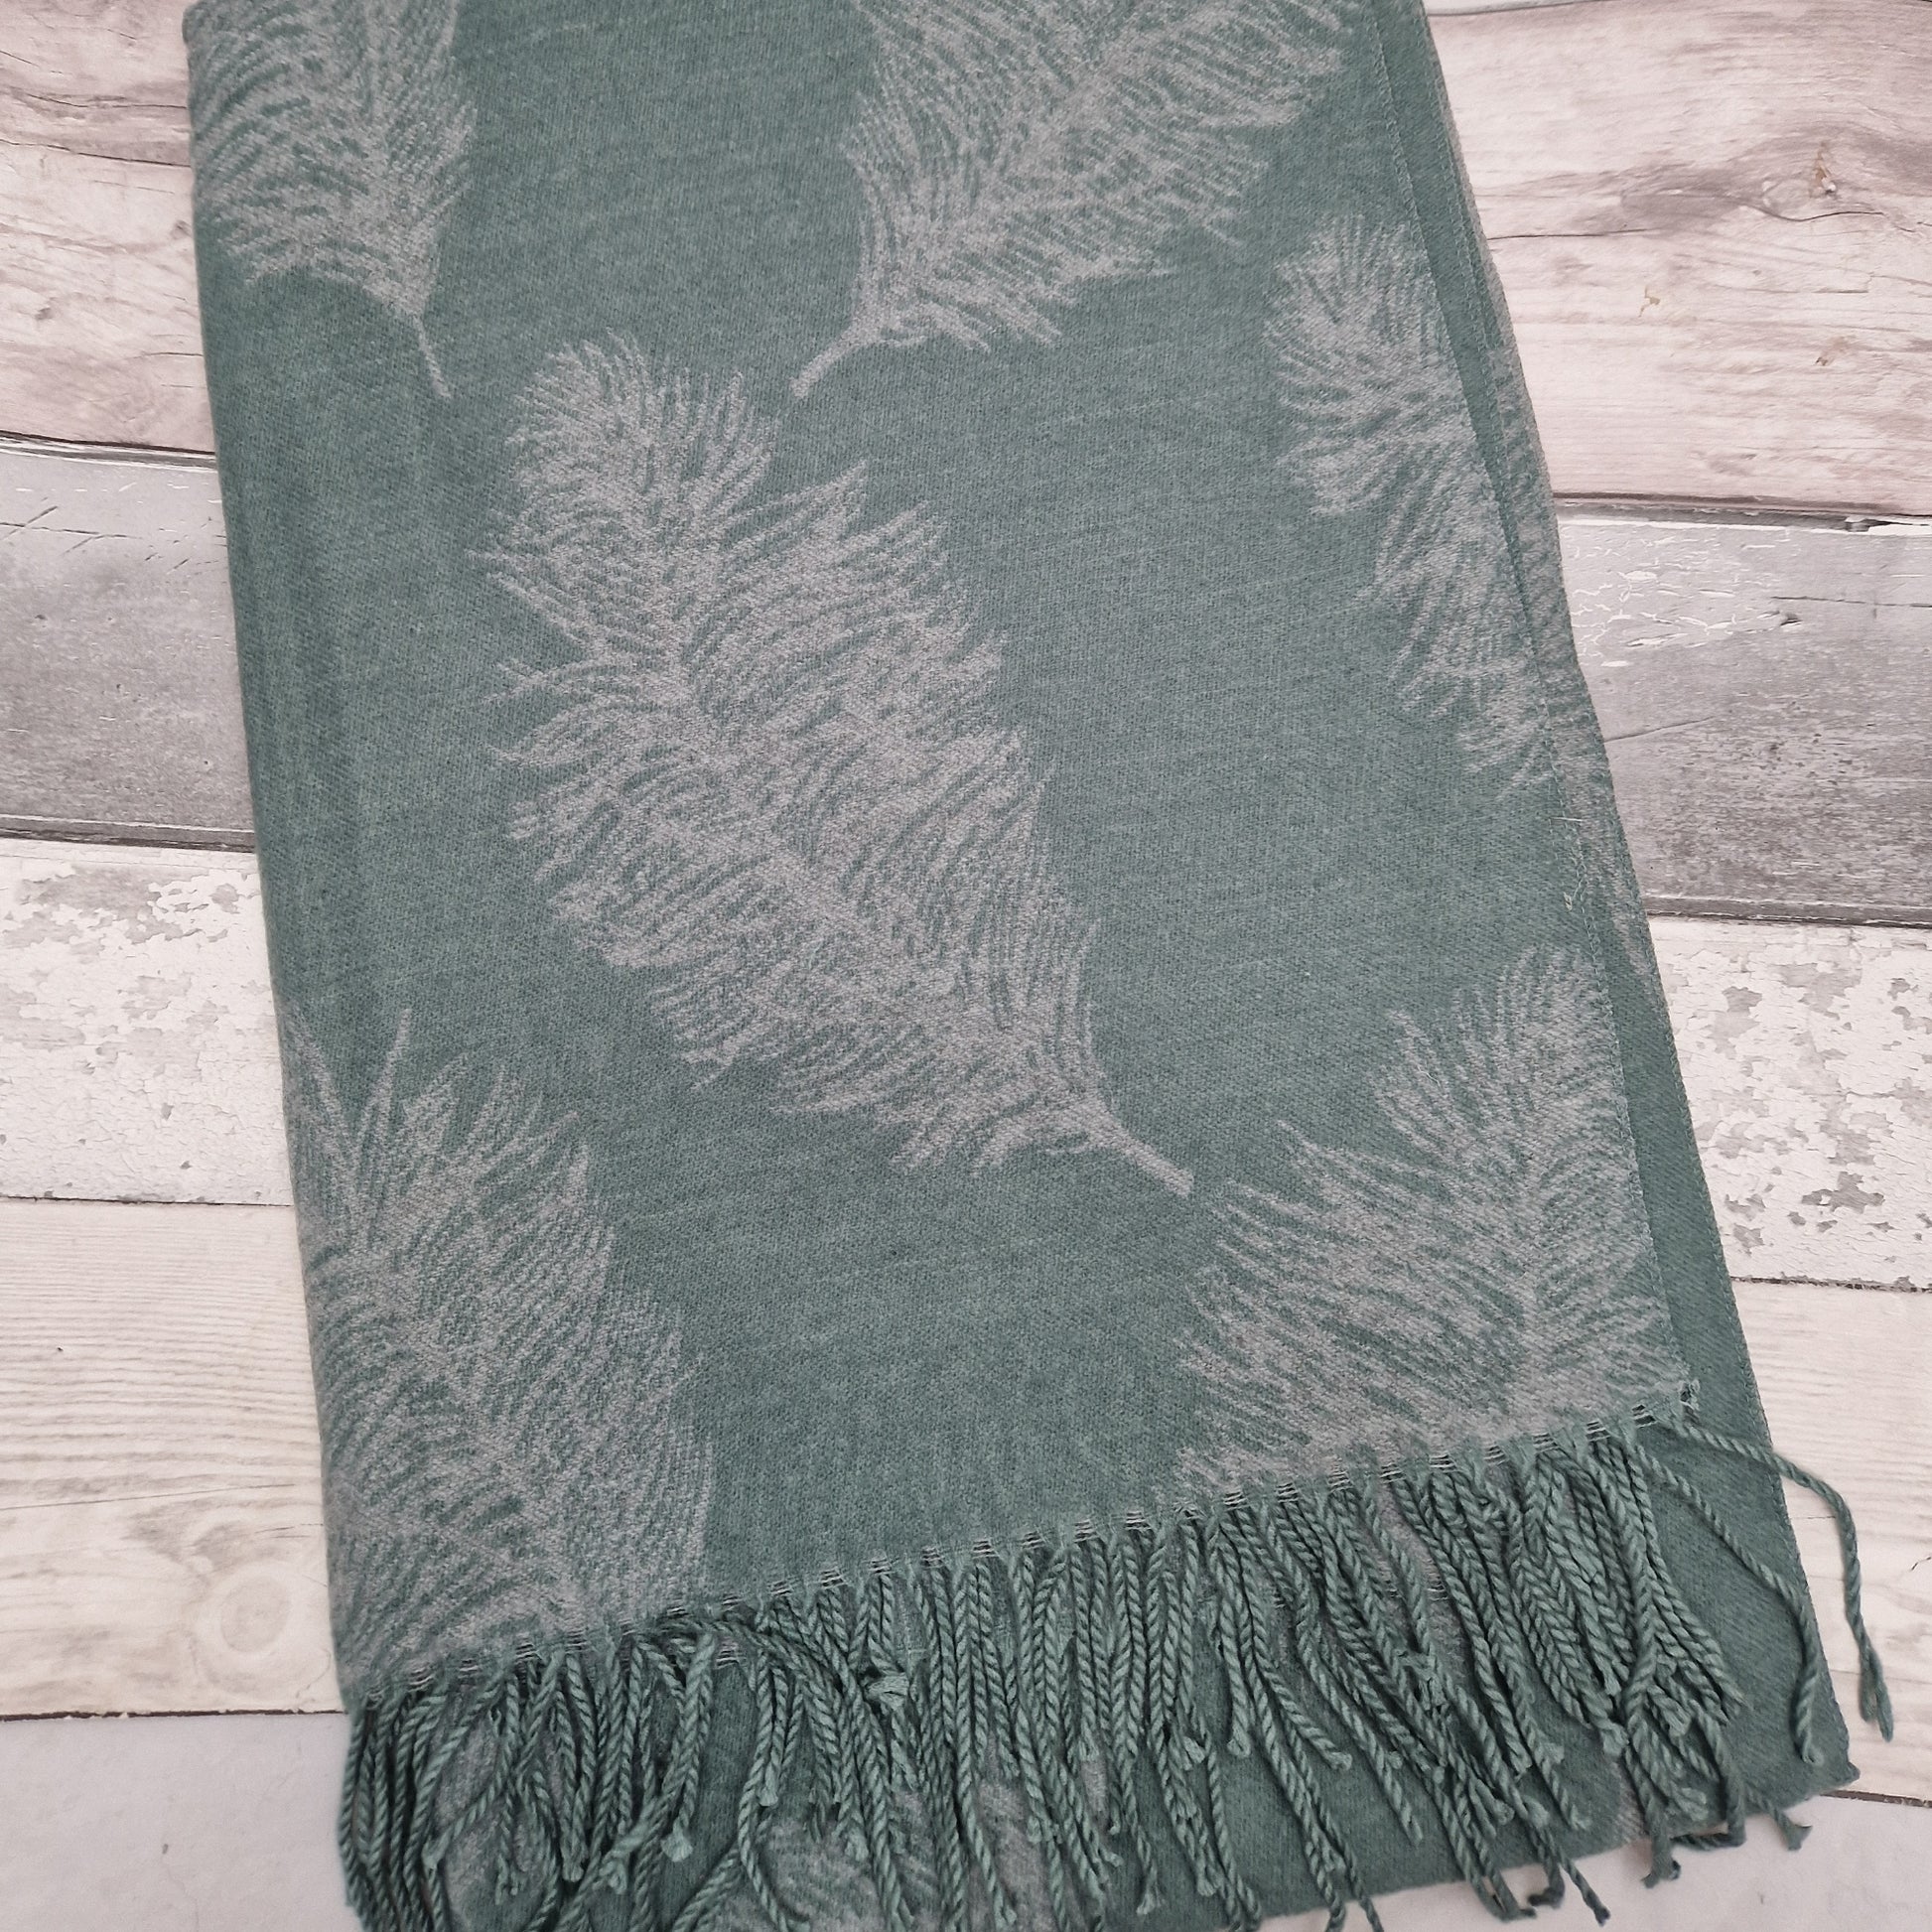 Feather print cashmere mix scarf in green and grey.